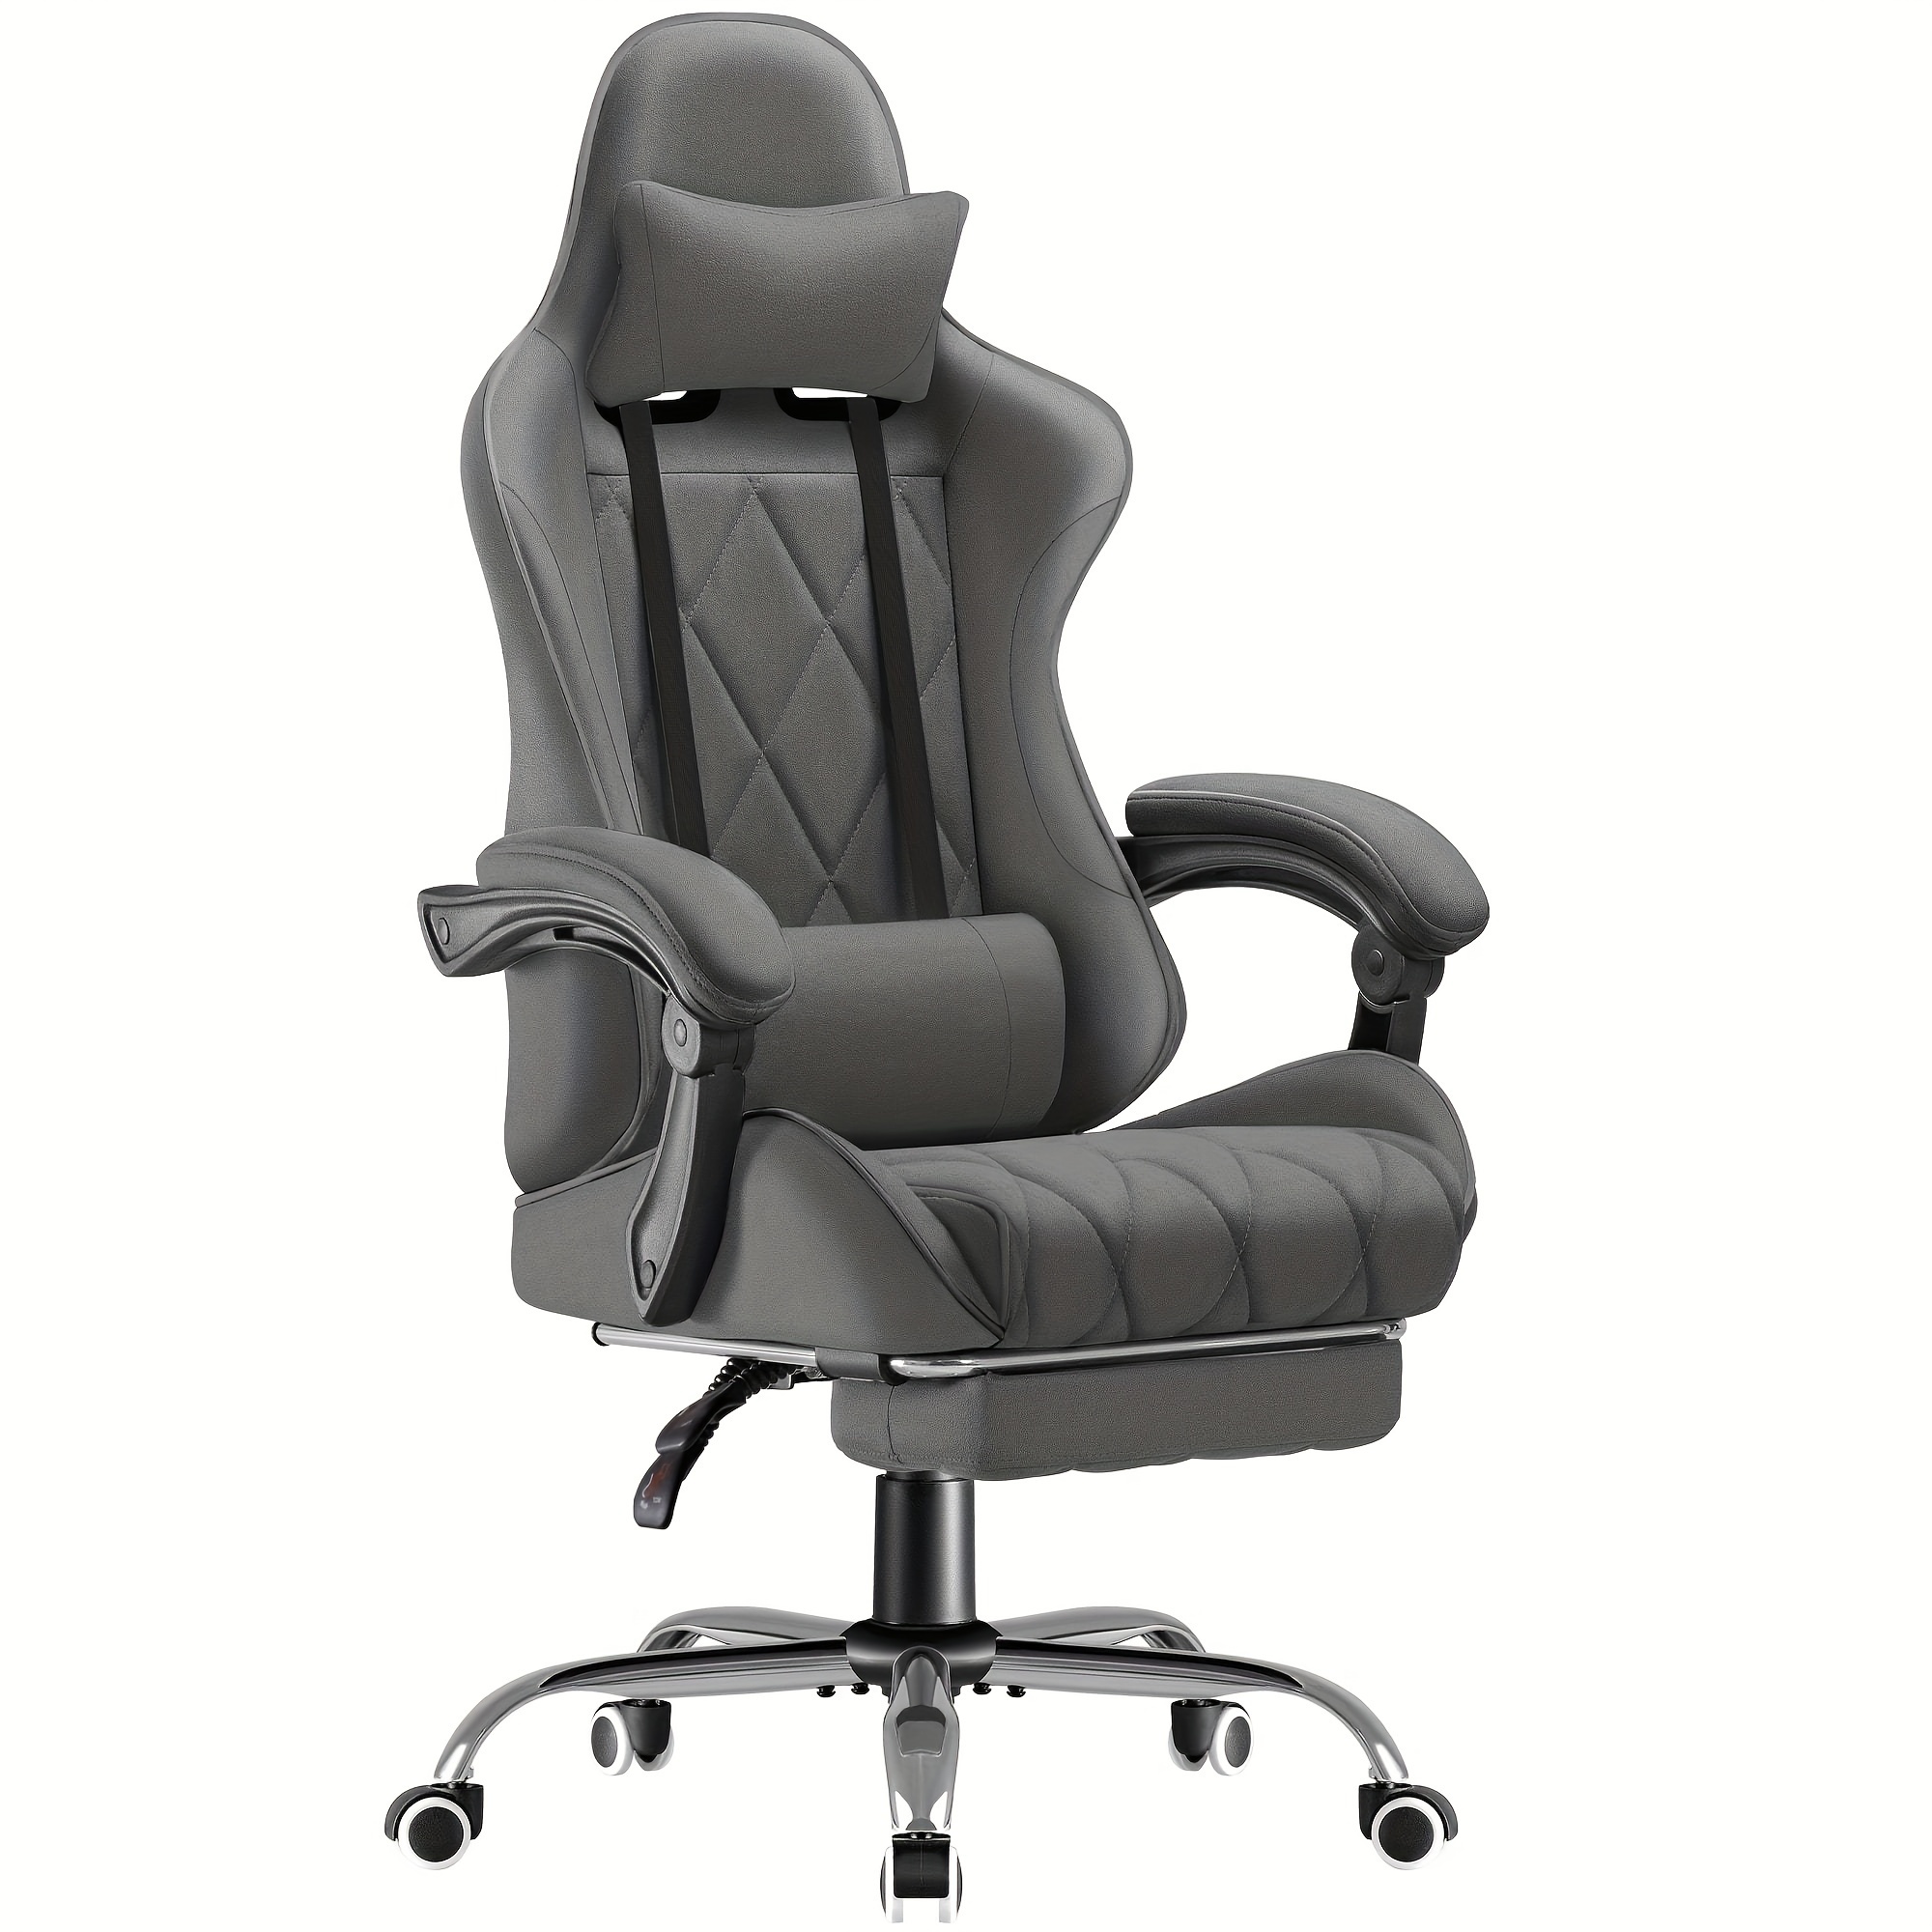 

Fabric Computer Chair Gaming Chair Massage Cloth Office Chair With Headrest, Lumbar Support & Footrest